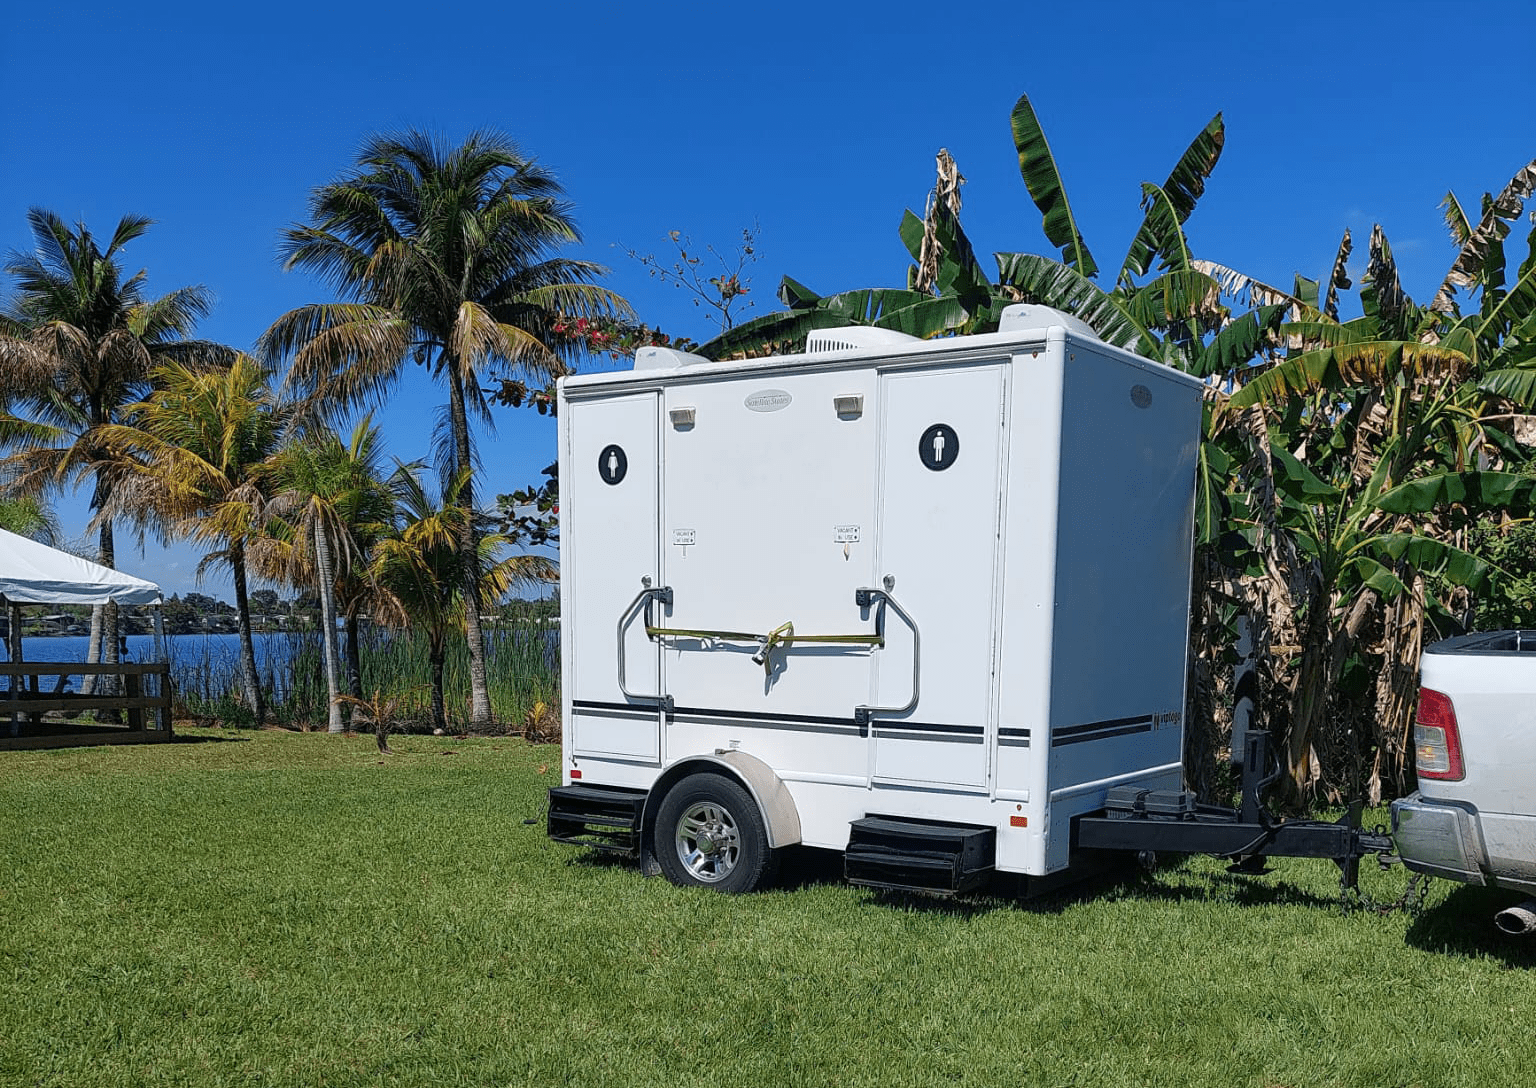 handicap accessible trailer parked on grass